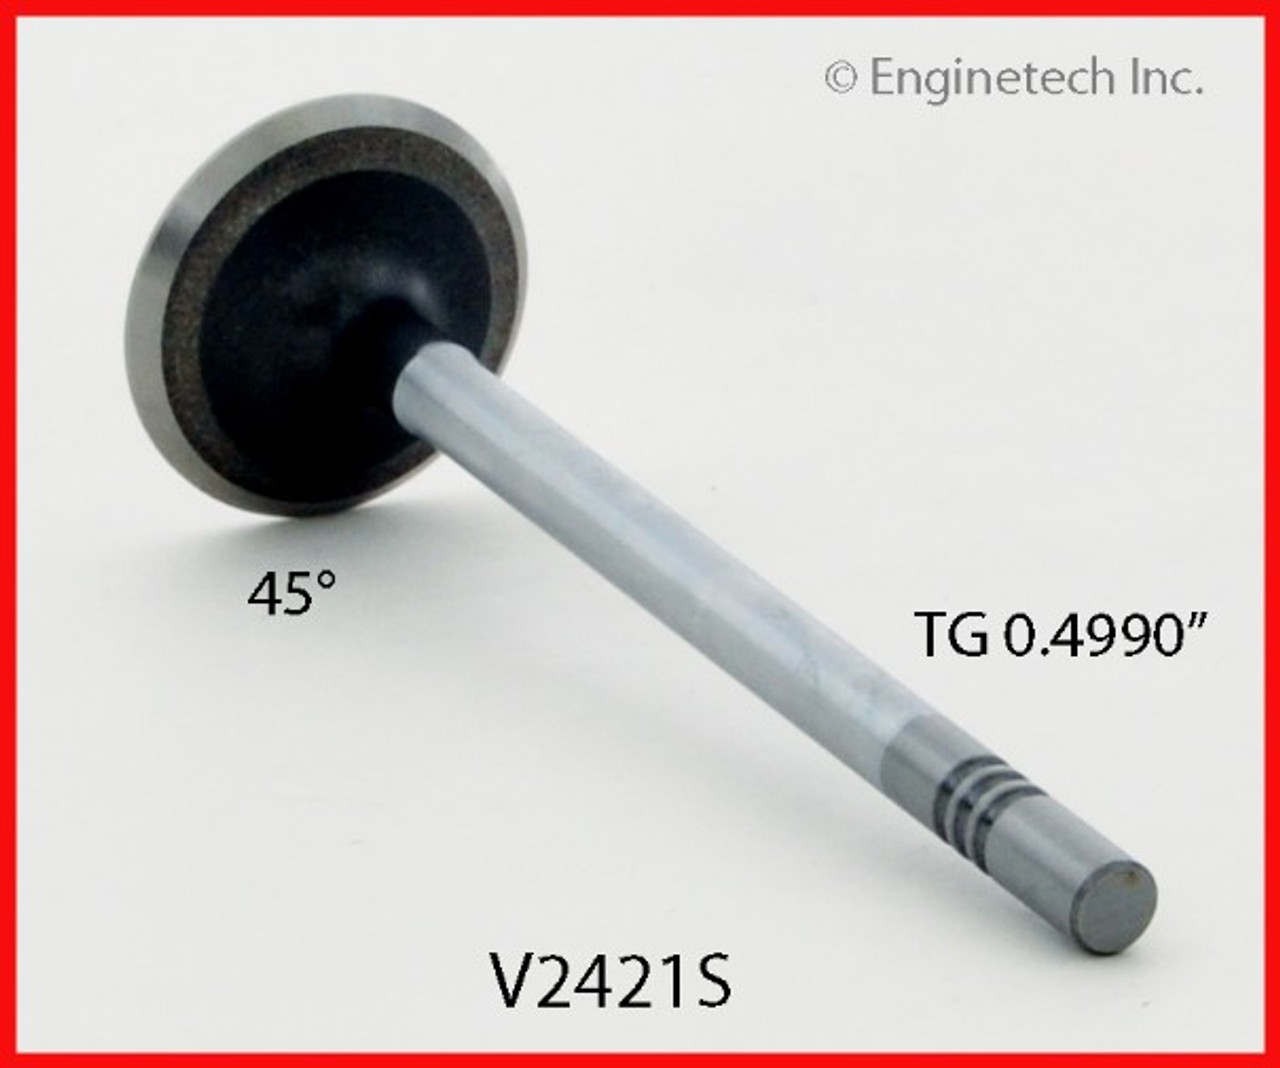 Exhaust Valve - 1997 Ford Mustang 4.6L (V2421S.C30)